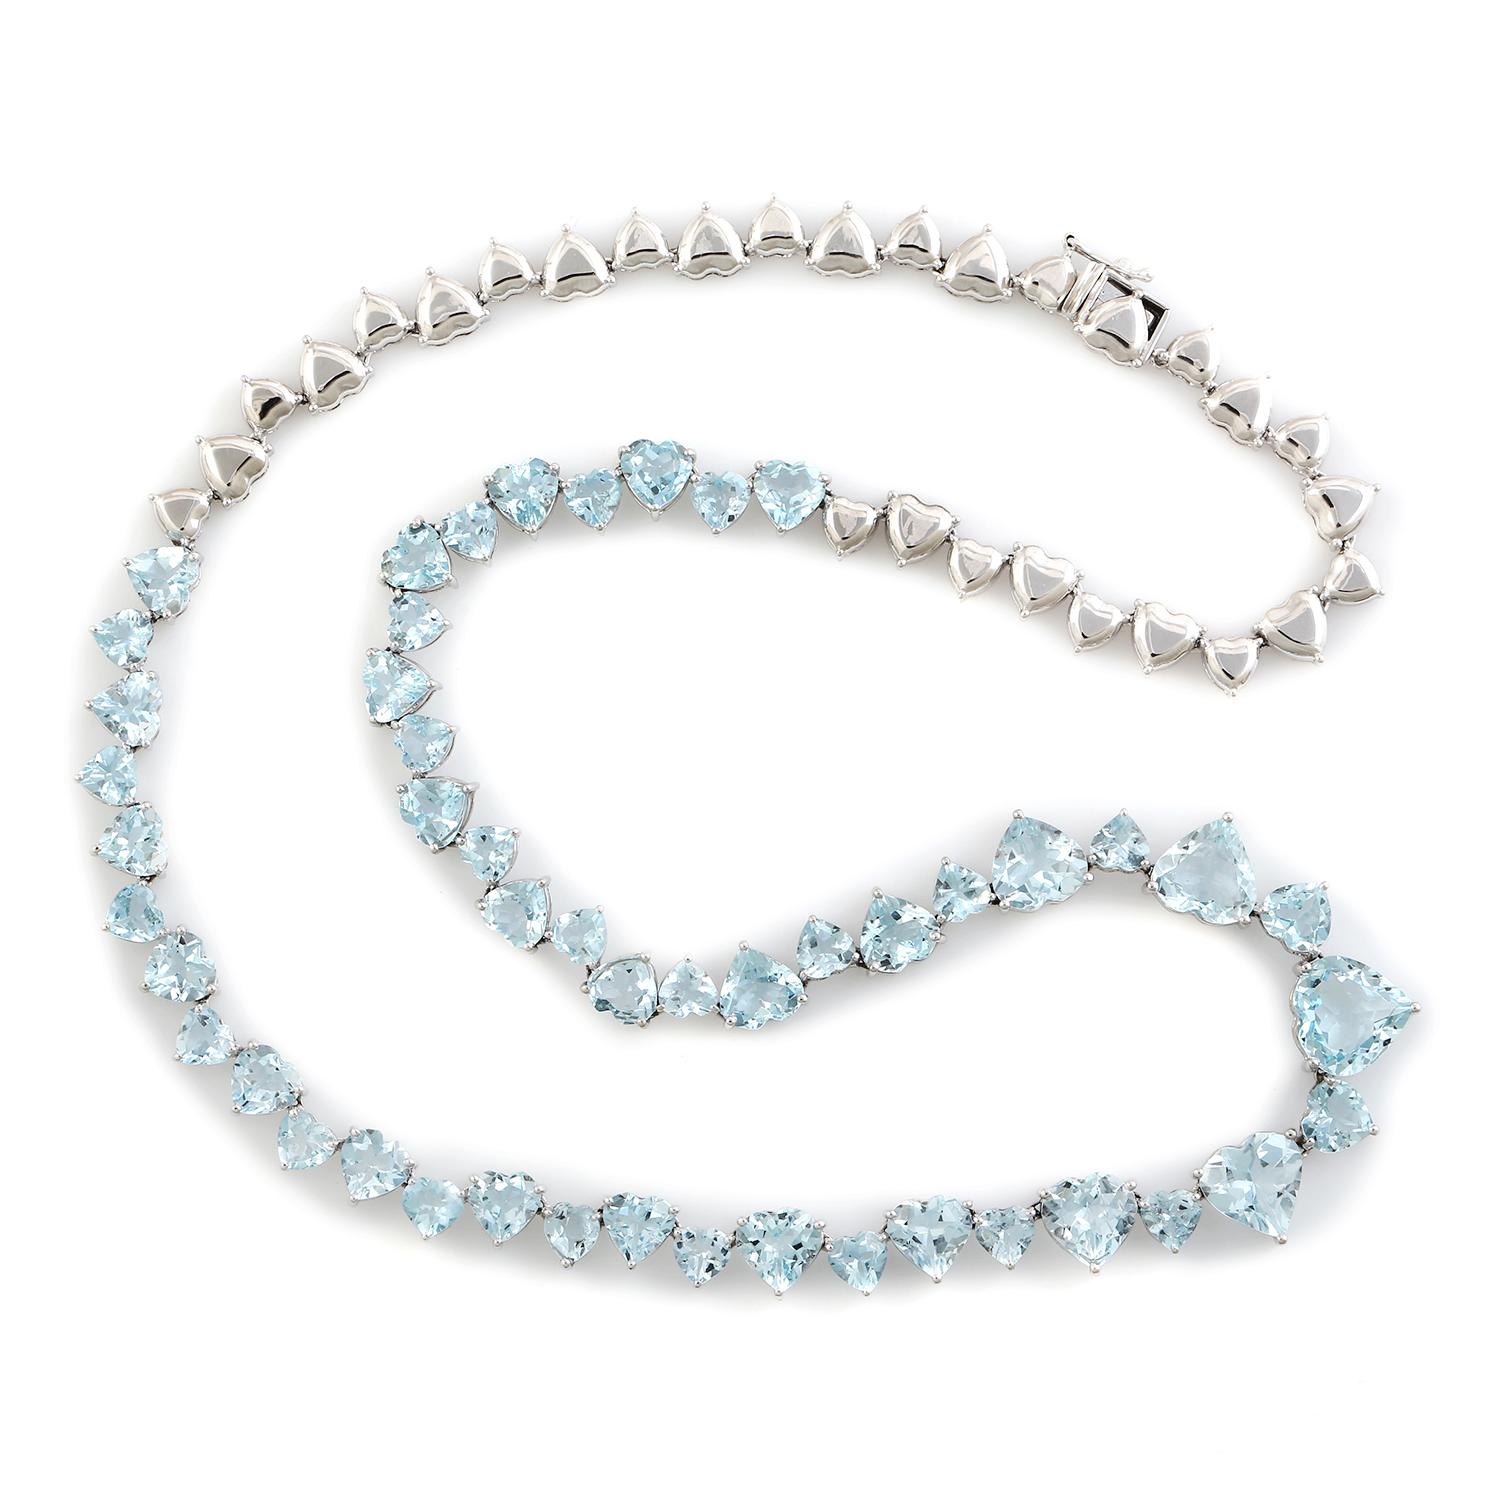 Contemporary 32.59 ct Heart Shaped Aquamarine Necklace Made In 18k White Gold For Sale